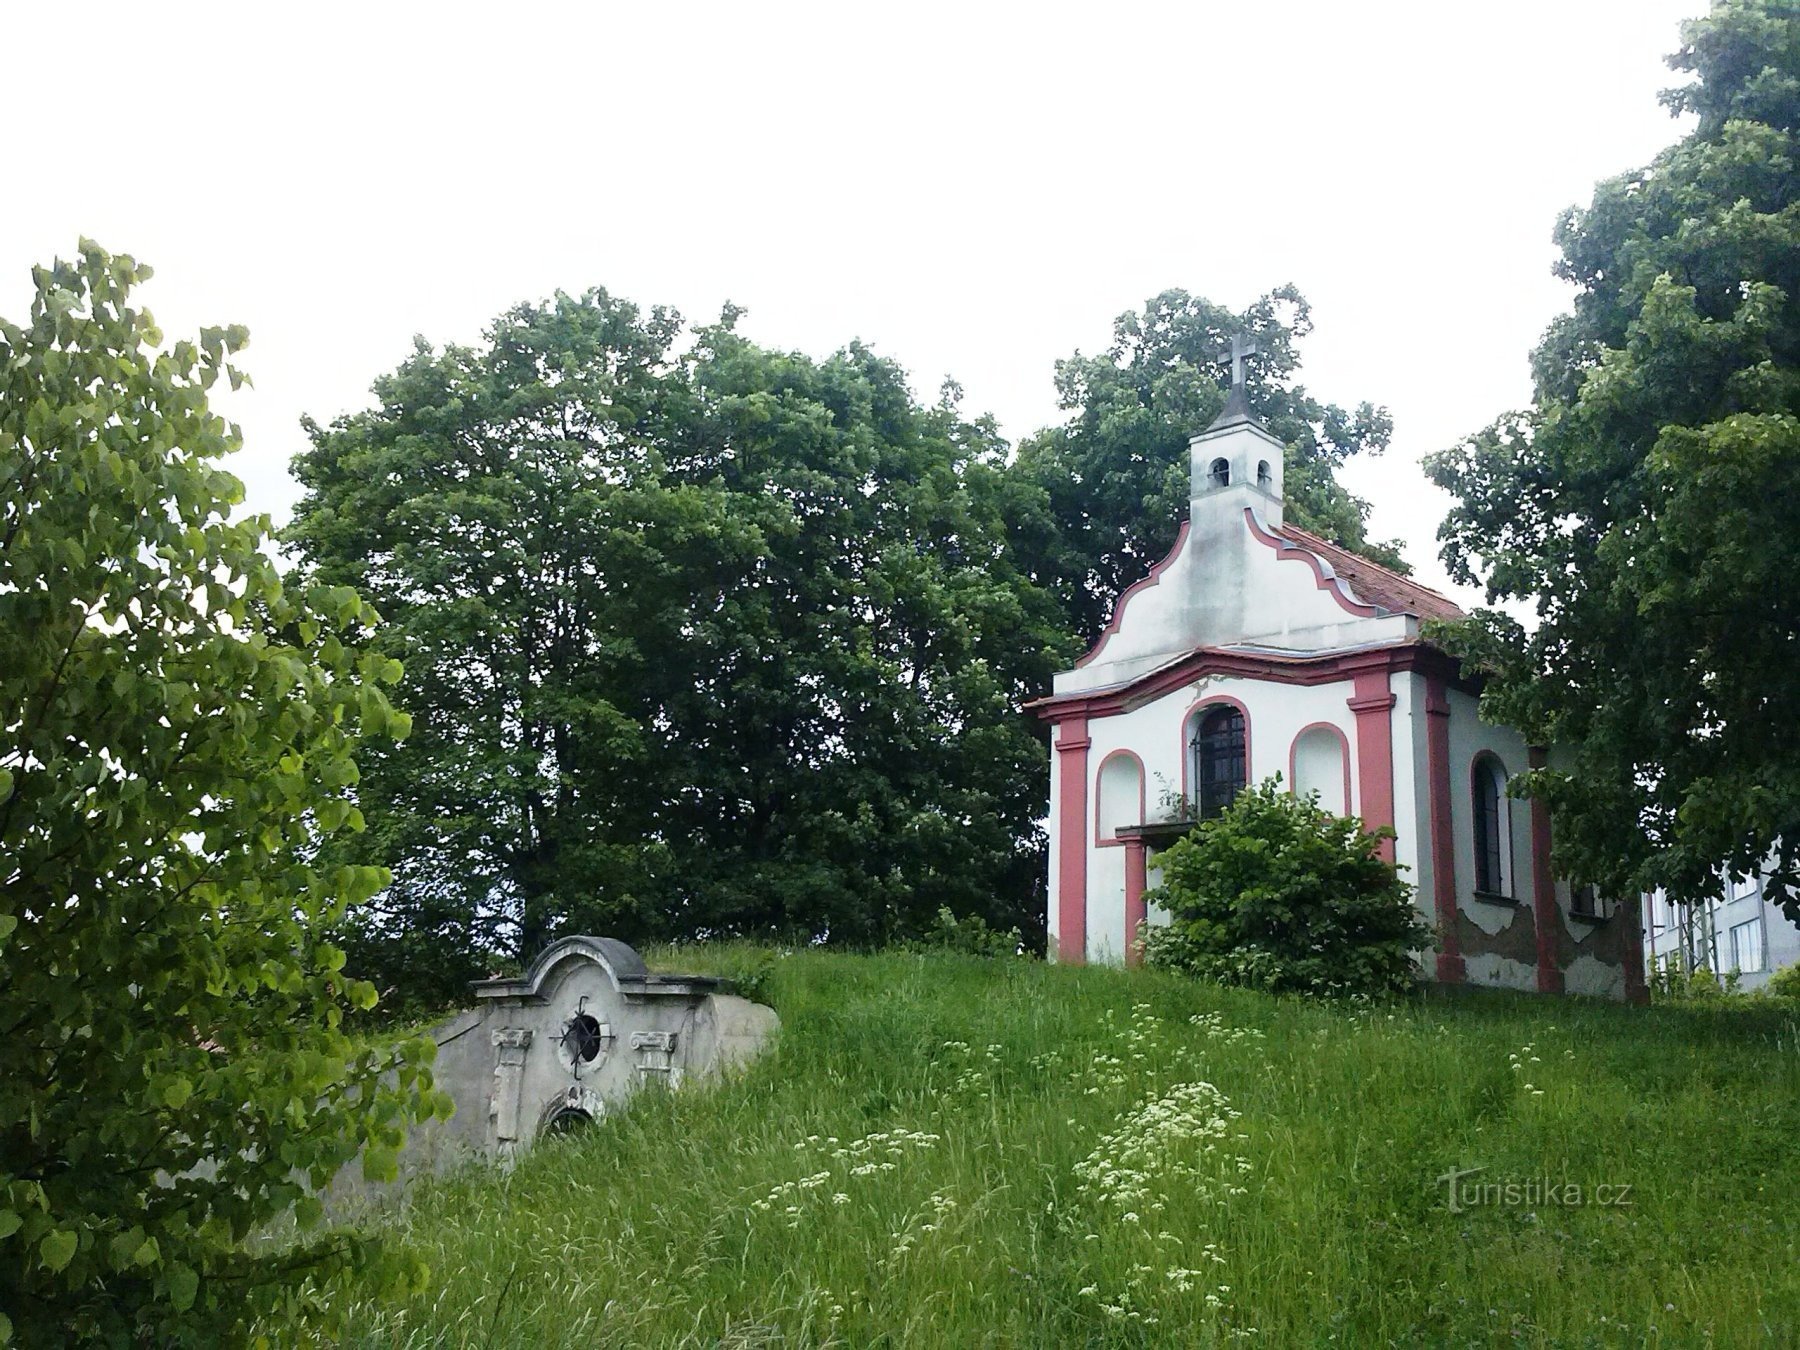 3. A church with an underground cave - grotto